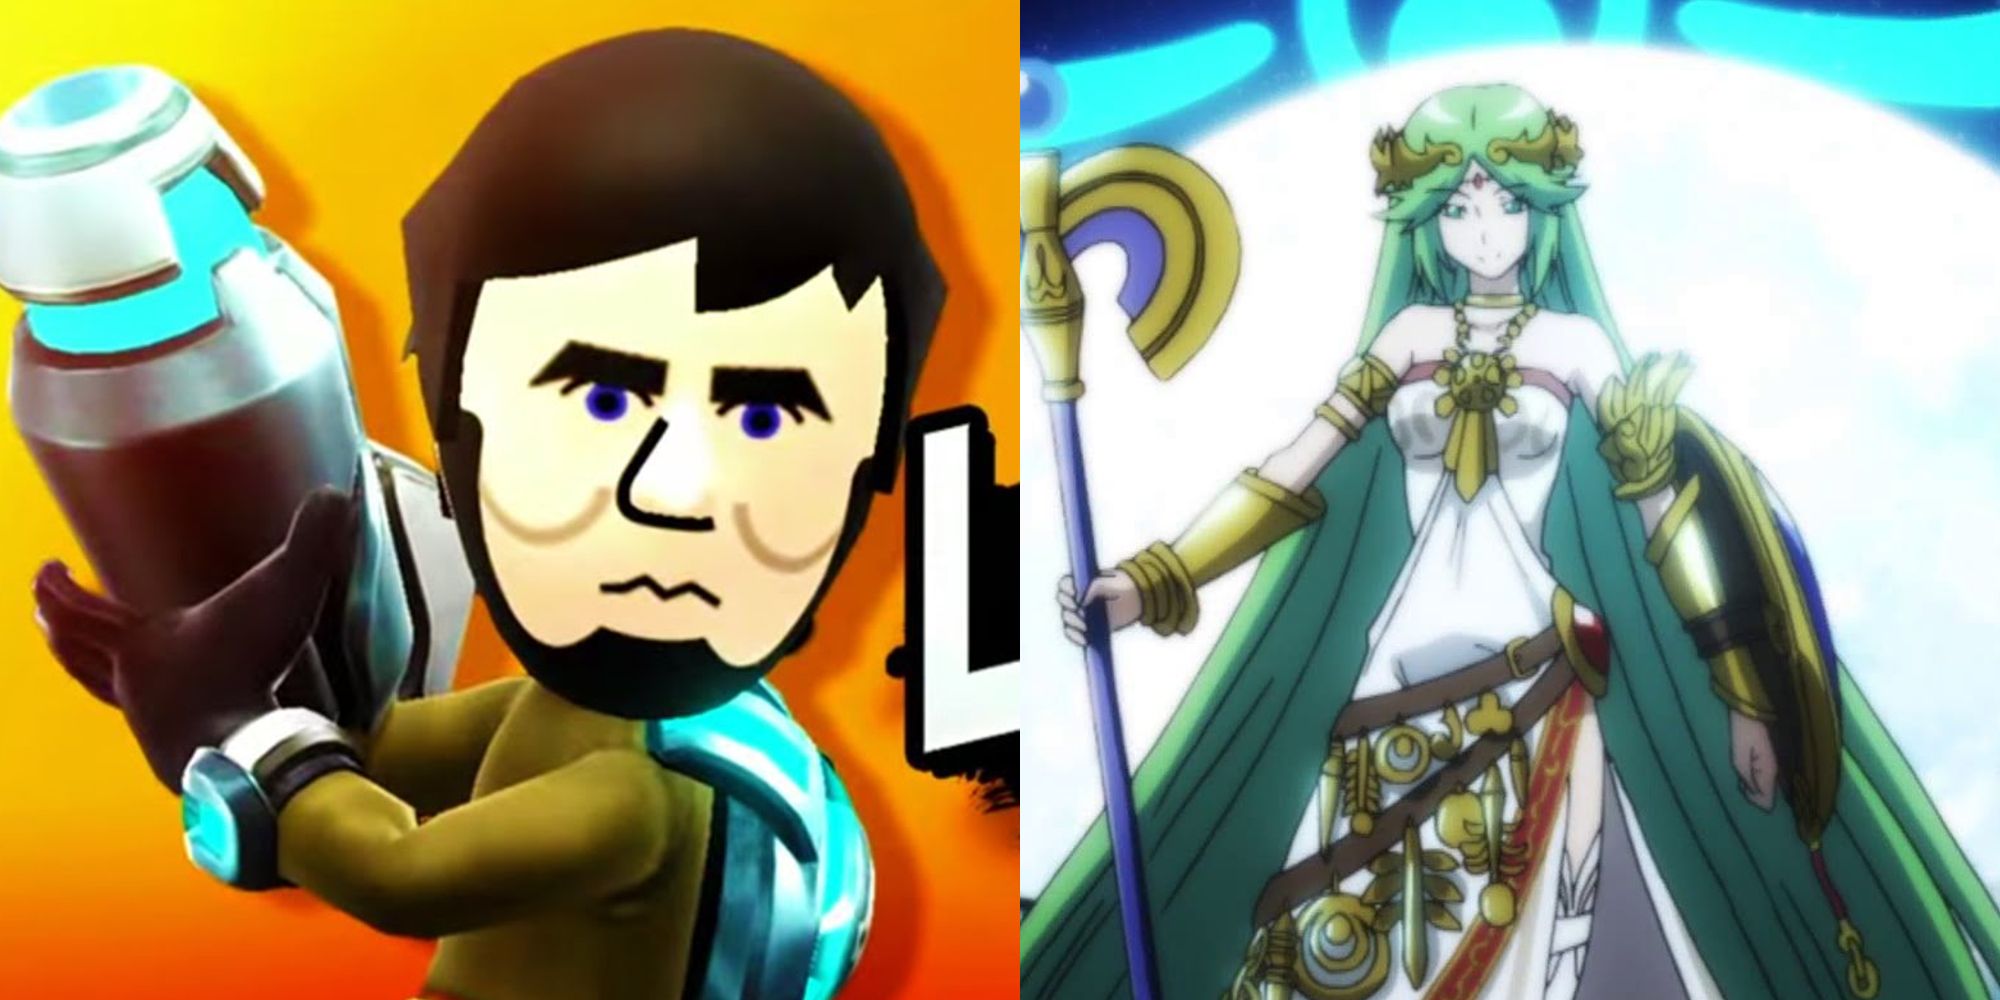 A Mii Fighter of Abe Lincoln as a Gunner; Palutena in her animated reveal trailer